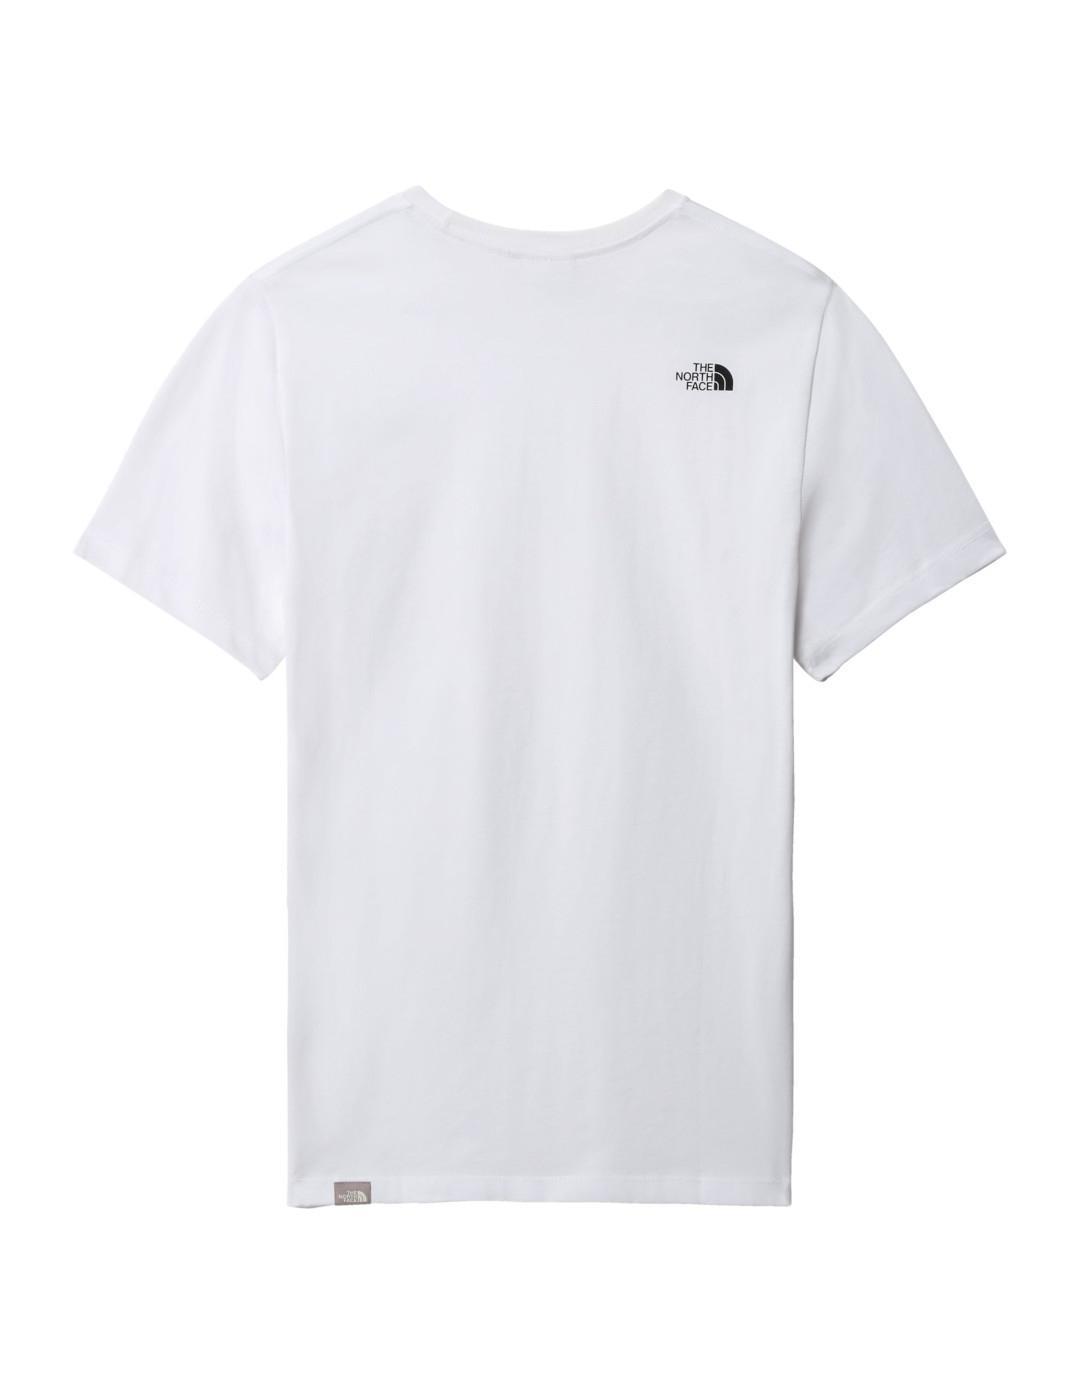 Camiseta Mujer The North Face Simple Dome Blanca